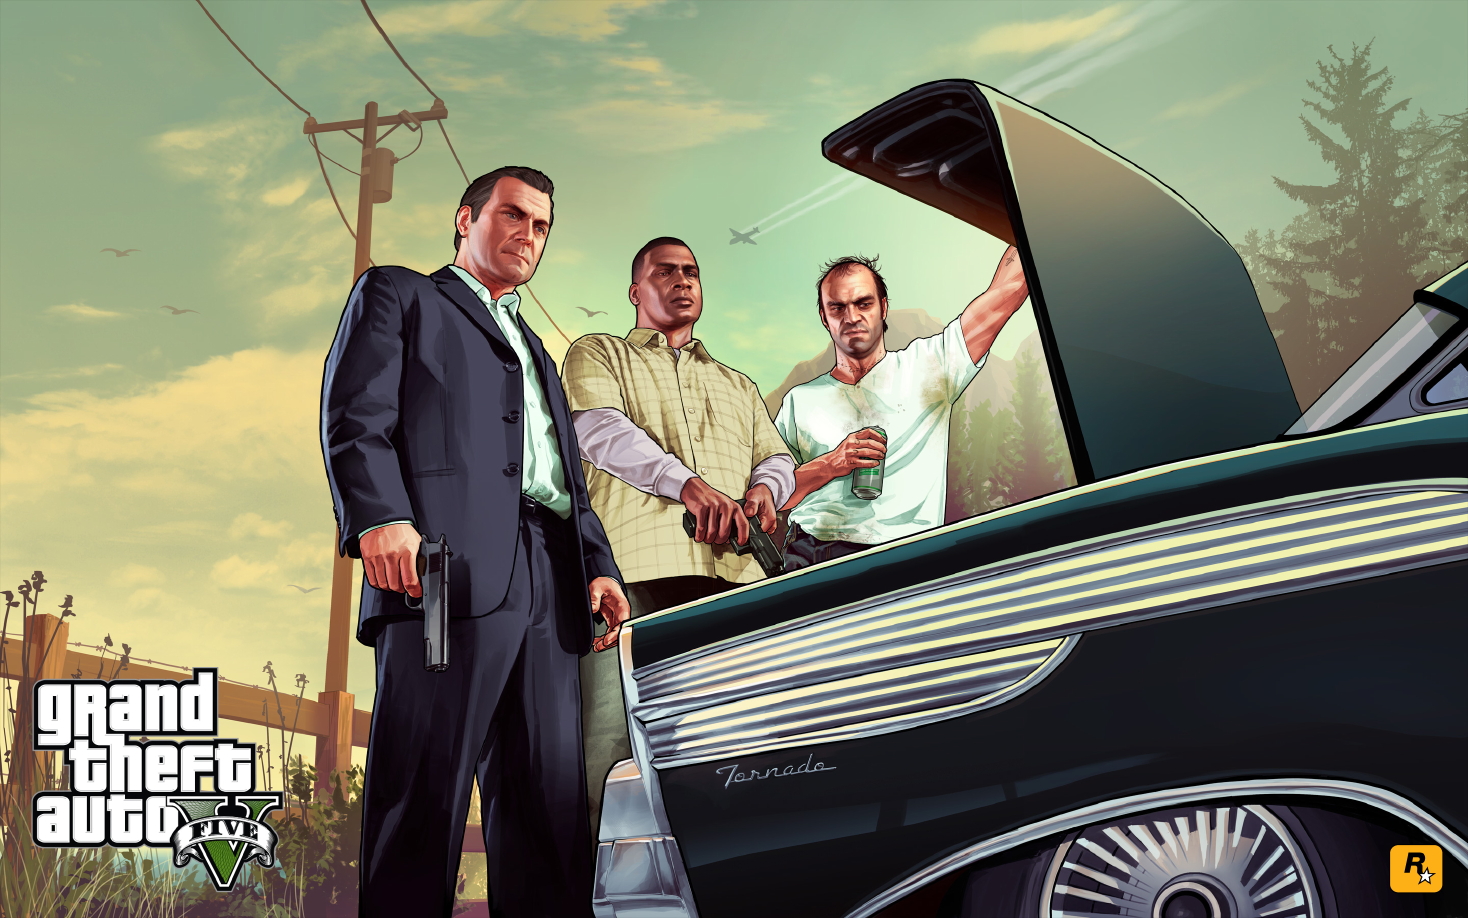 gta 5 game free download full version for pc windows 10